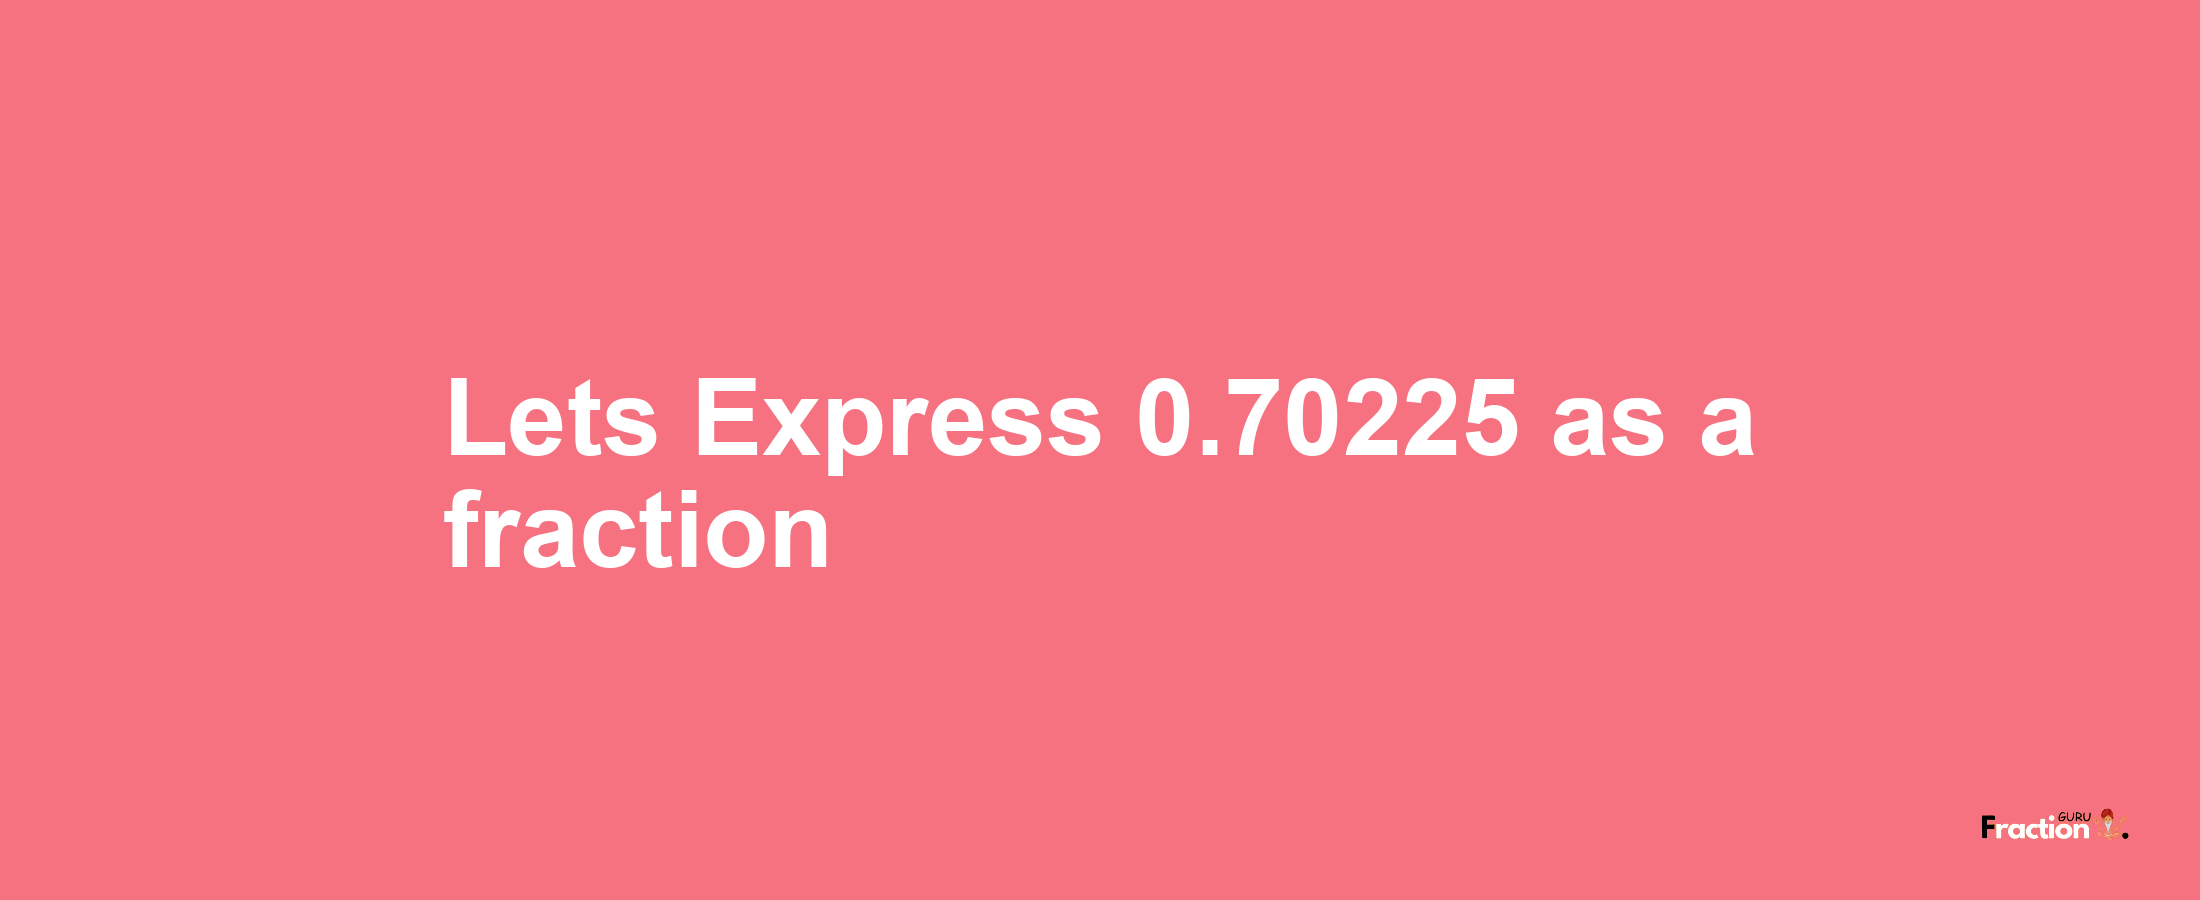 Lets Express 0.70225 as afraction